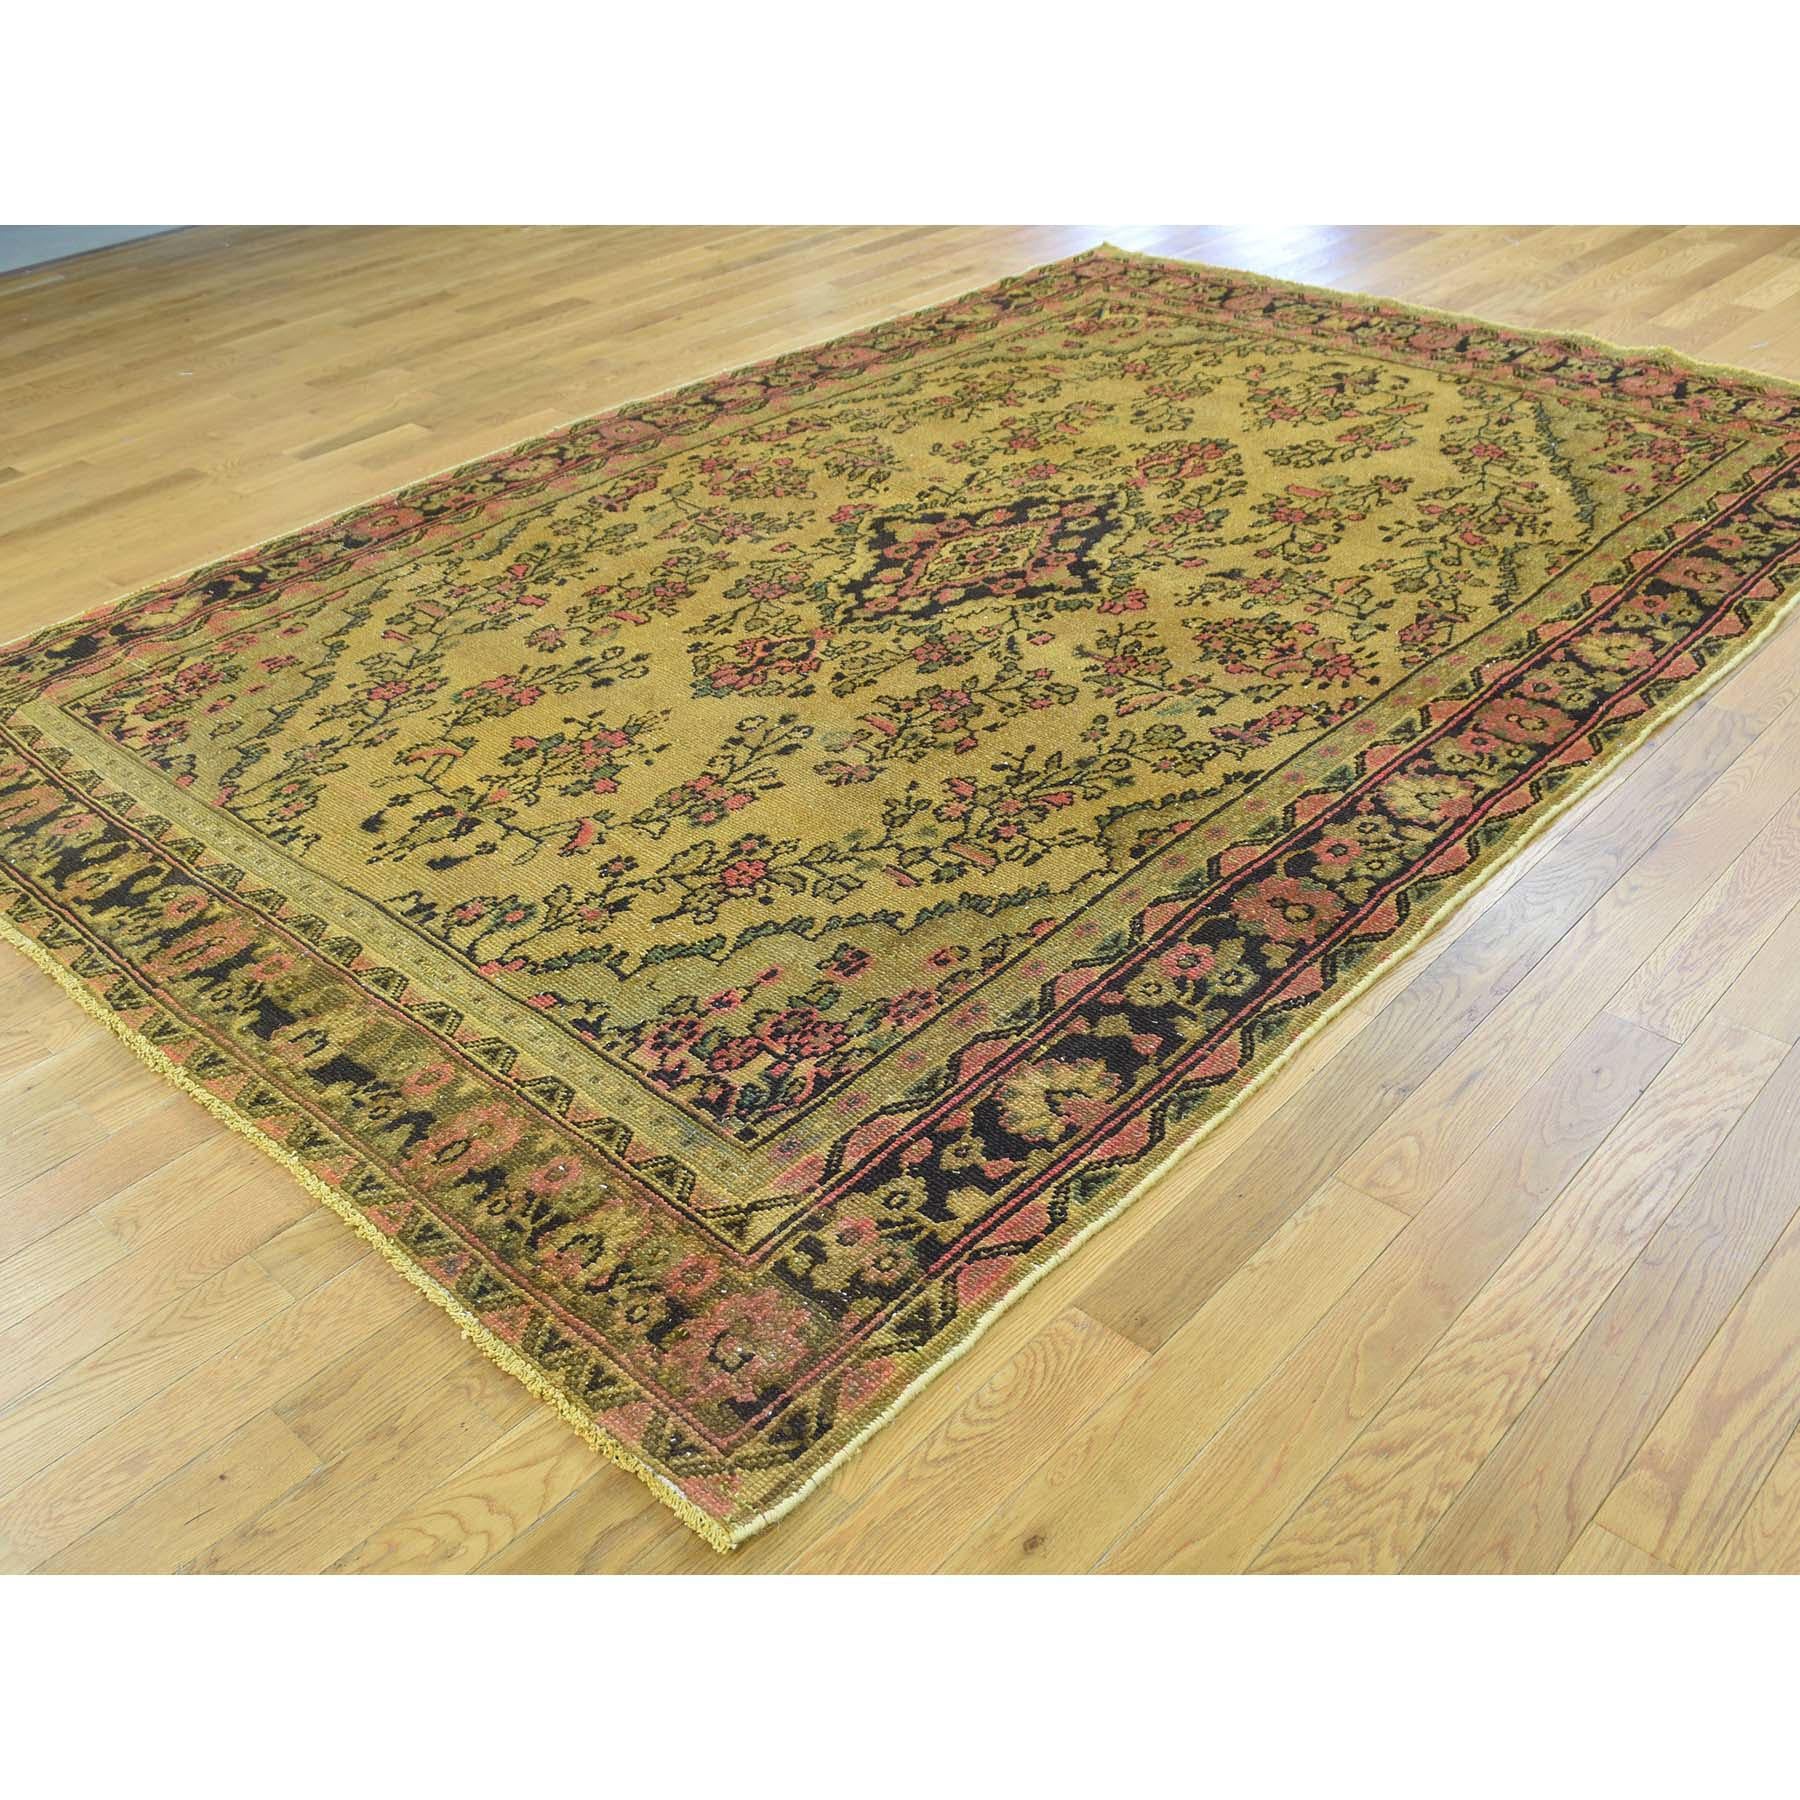 Medieval Hand Knotted Gold Cast Overdyed Persian Bibikabad Vintage Worn Down Wool Rug